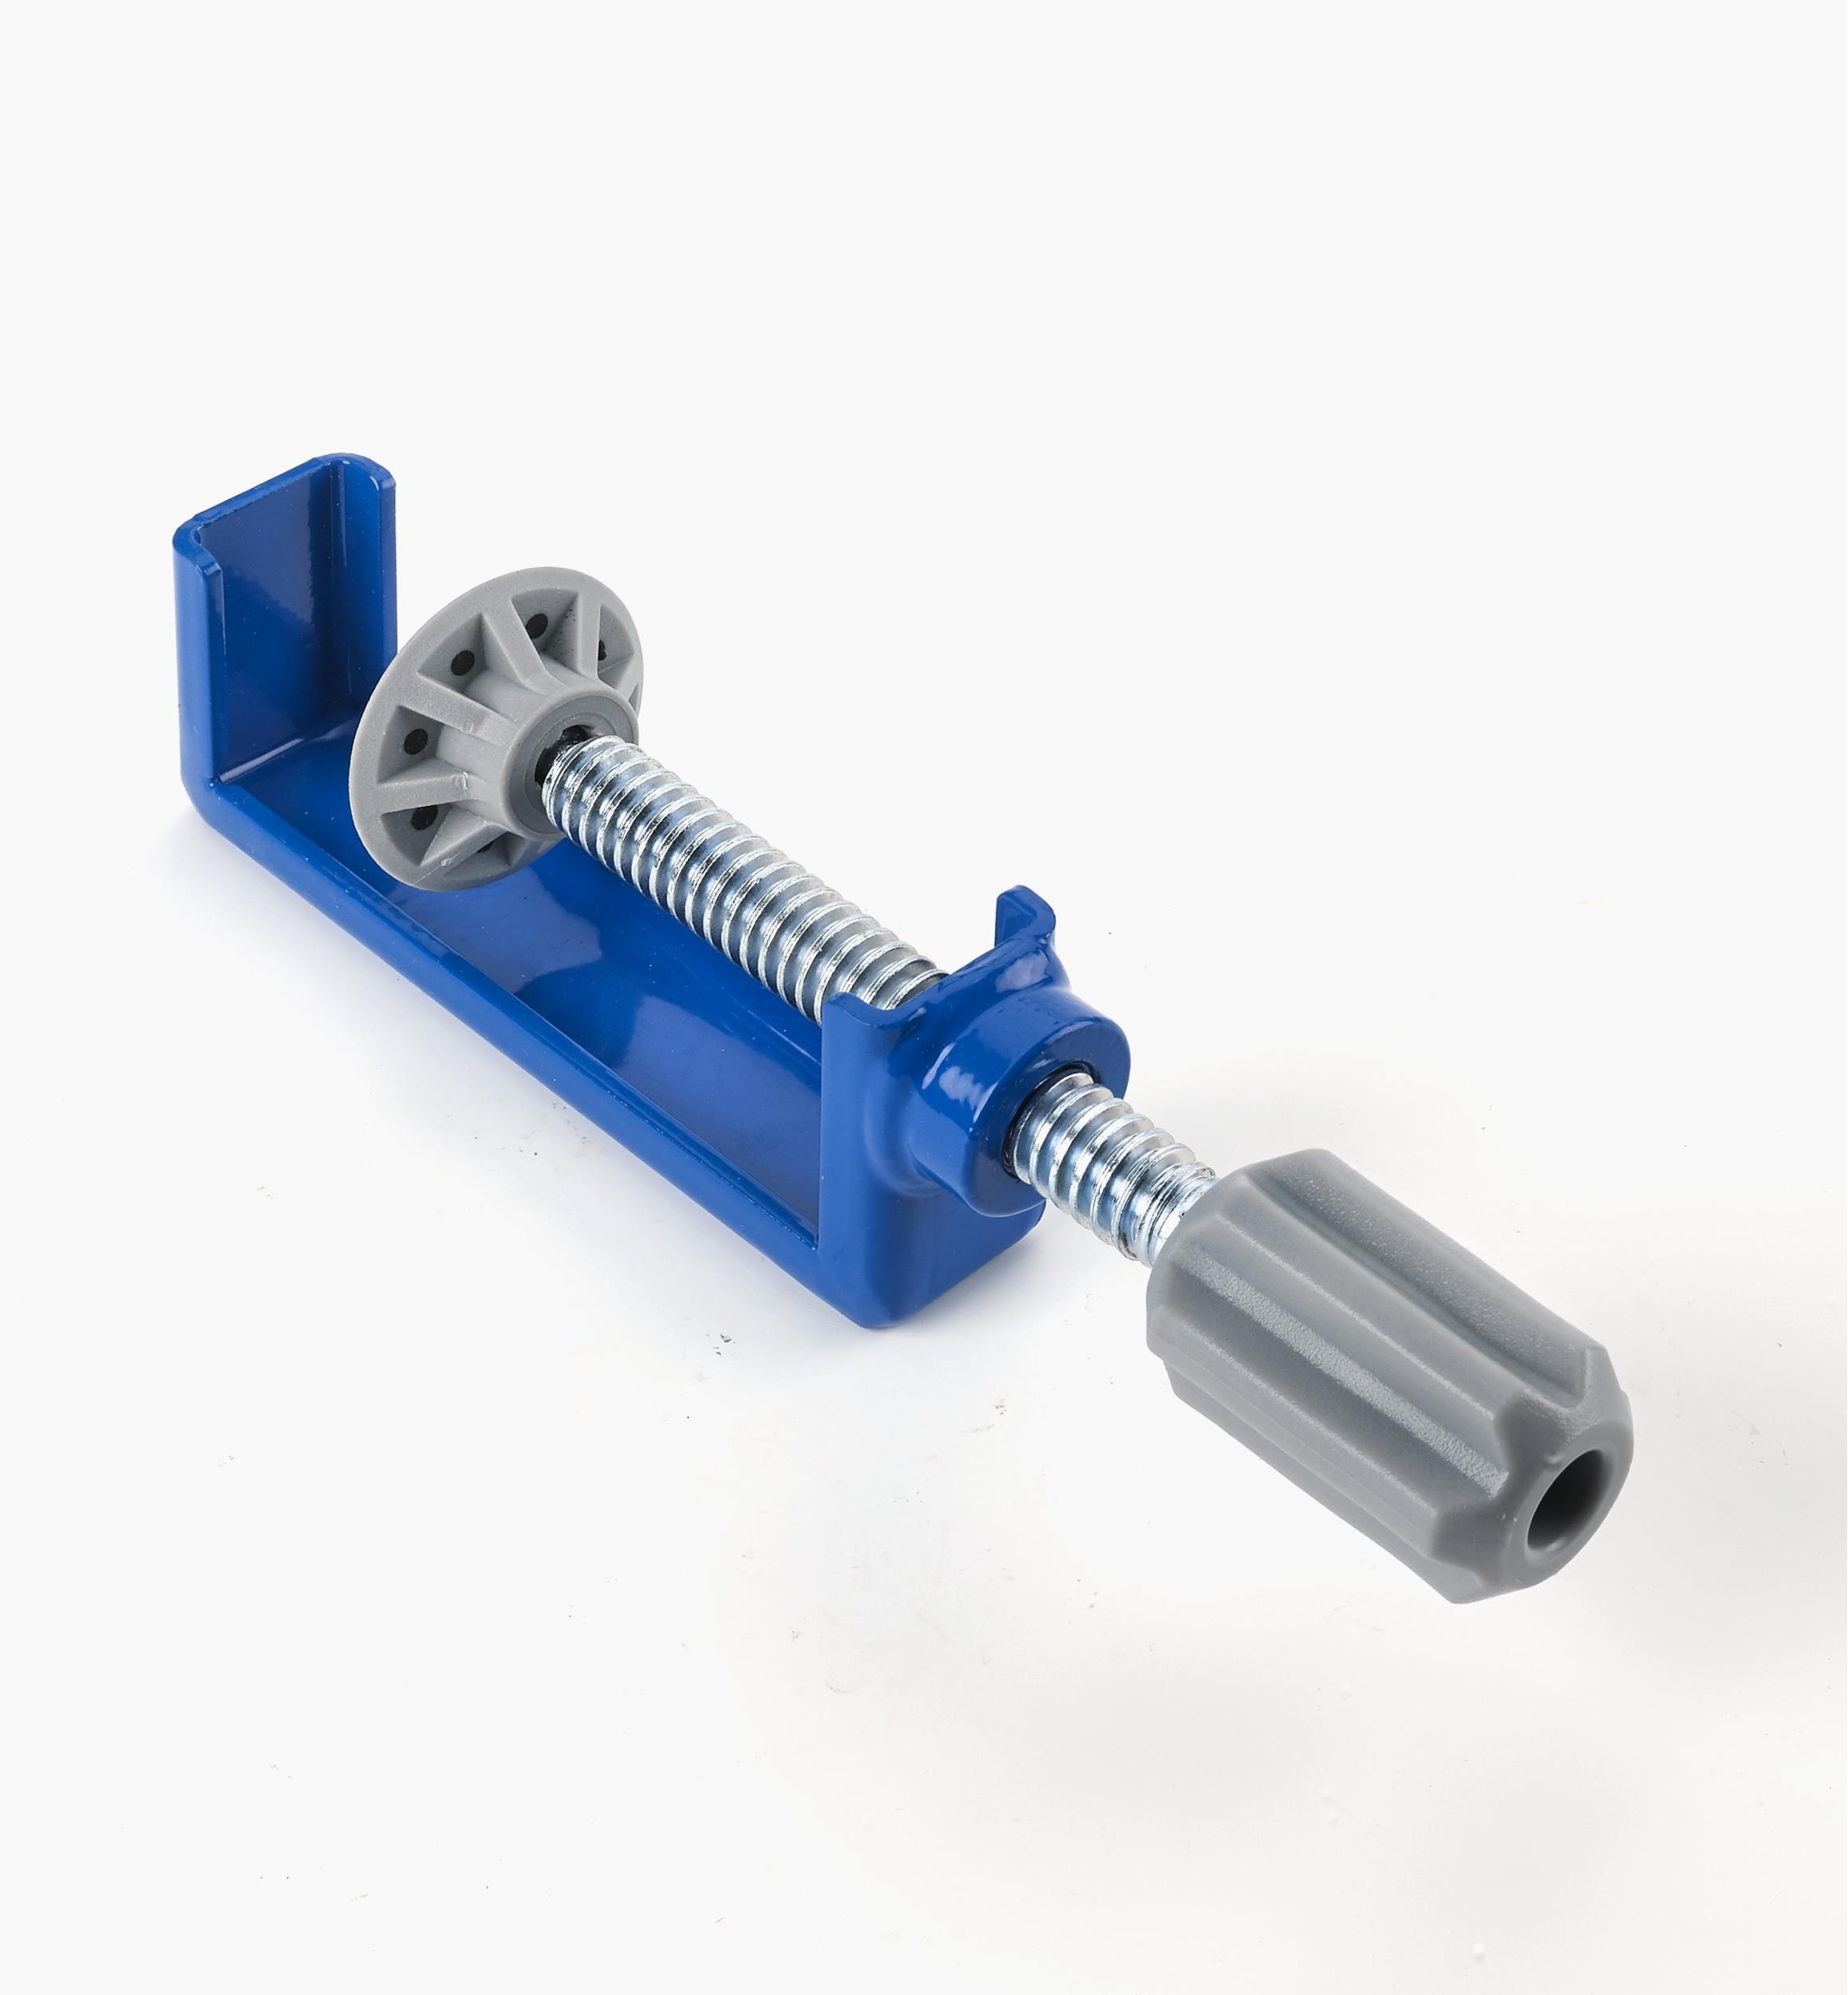 https://assets.leevalley.com/Size5/10109/25K6195-table-clamp-for-kreg-520-pro-and-720-pocket-hole-jigs-f-6723.jpg